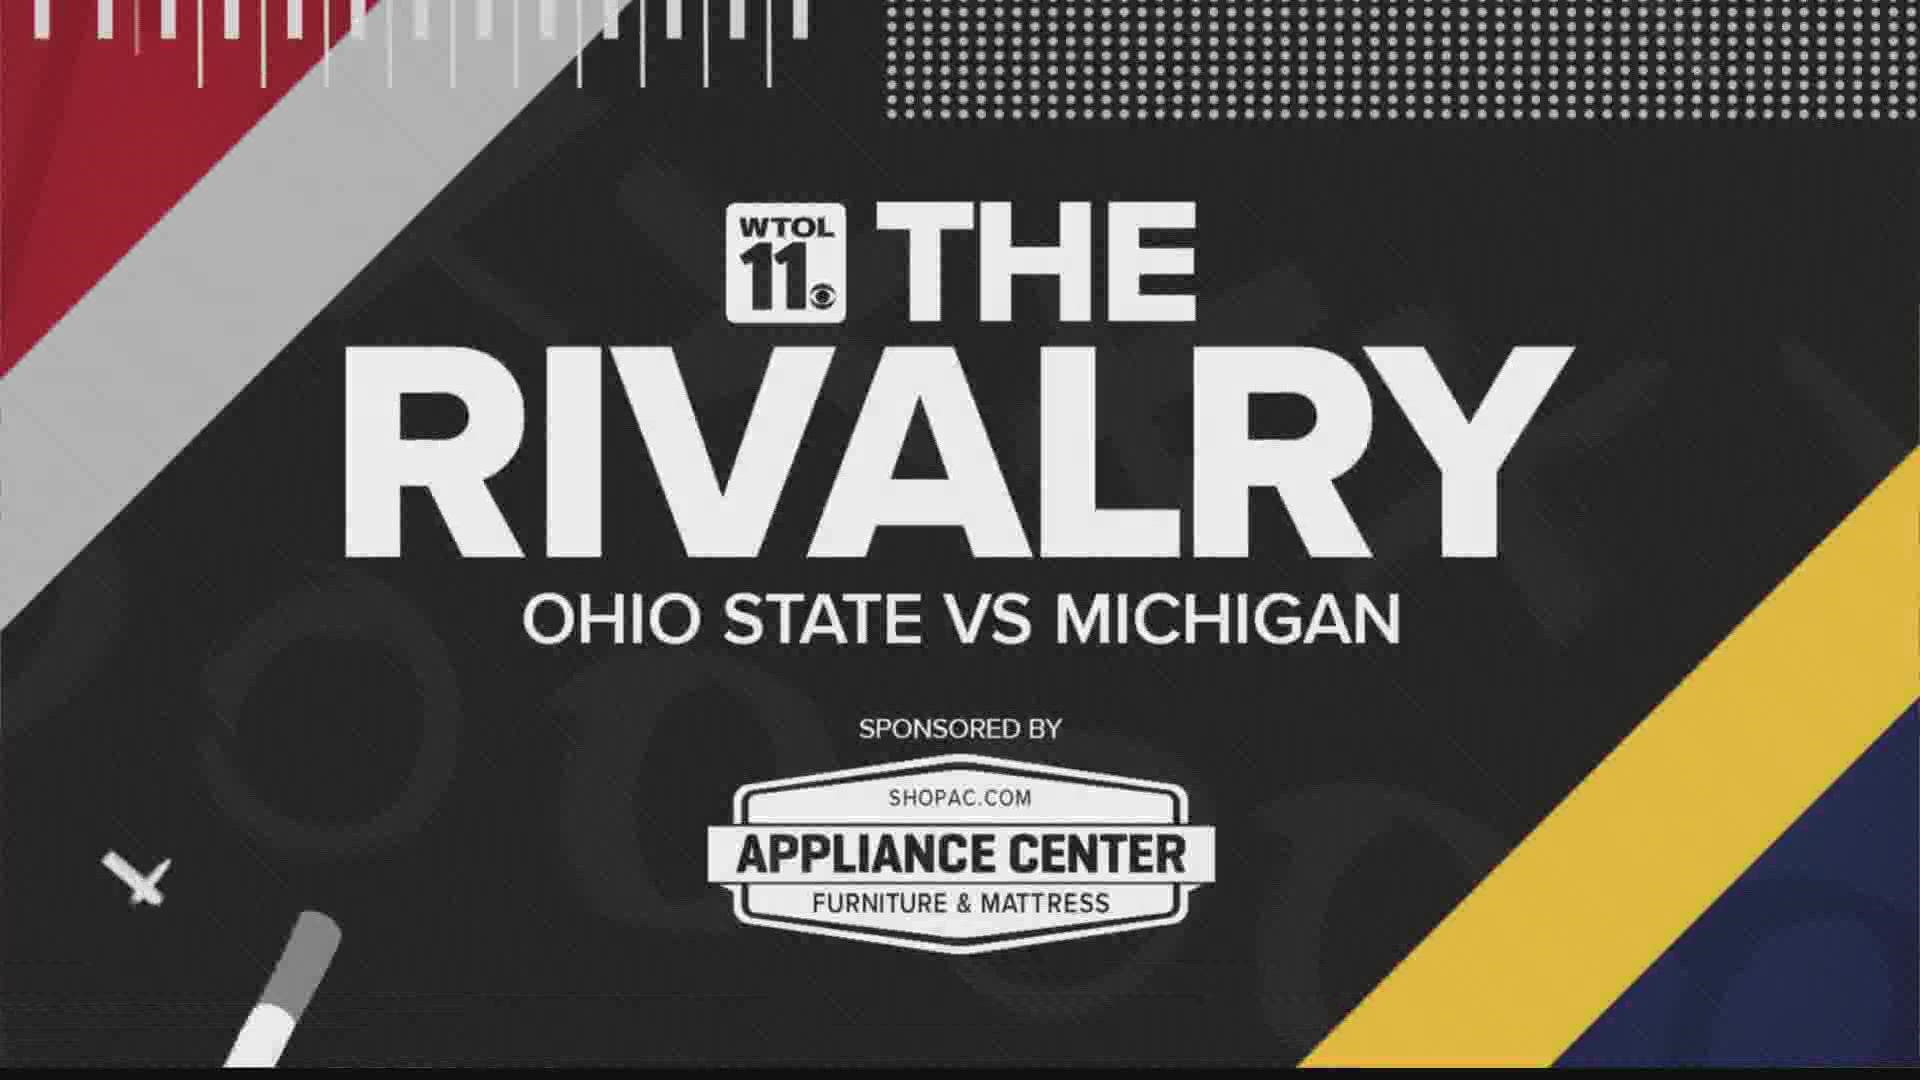 Live from Ann Arbor, WTOL 11 Sports brings you The Rivalry - all you need to know about the storied showdown between the Buckeyes and the Wolverines